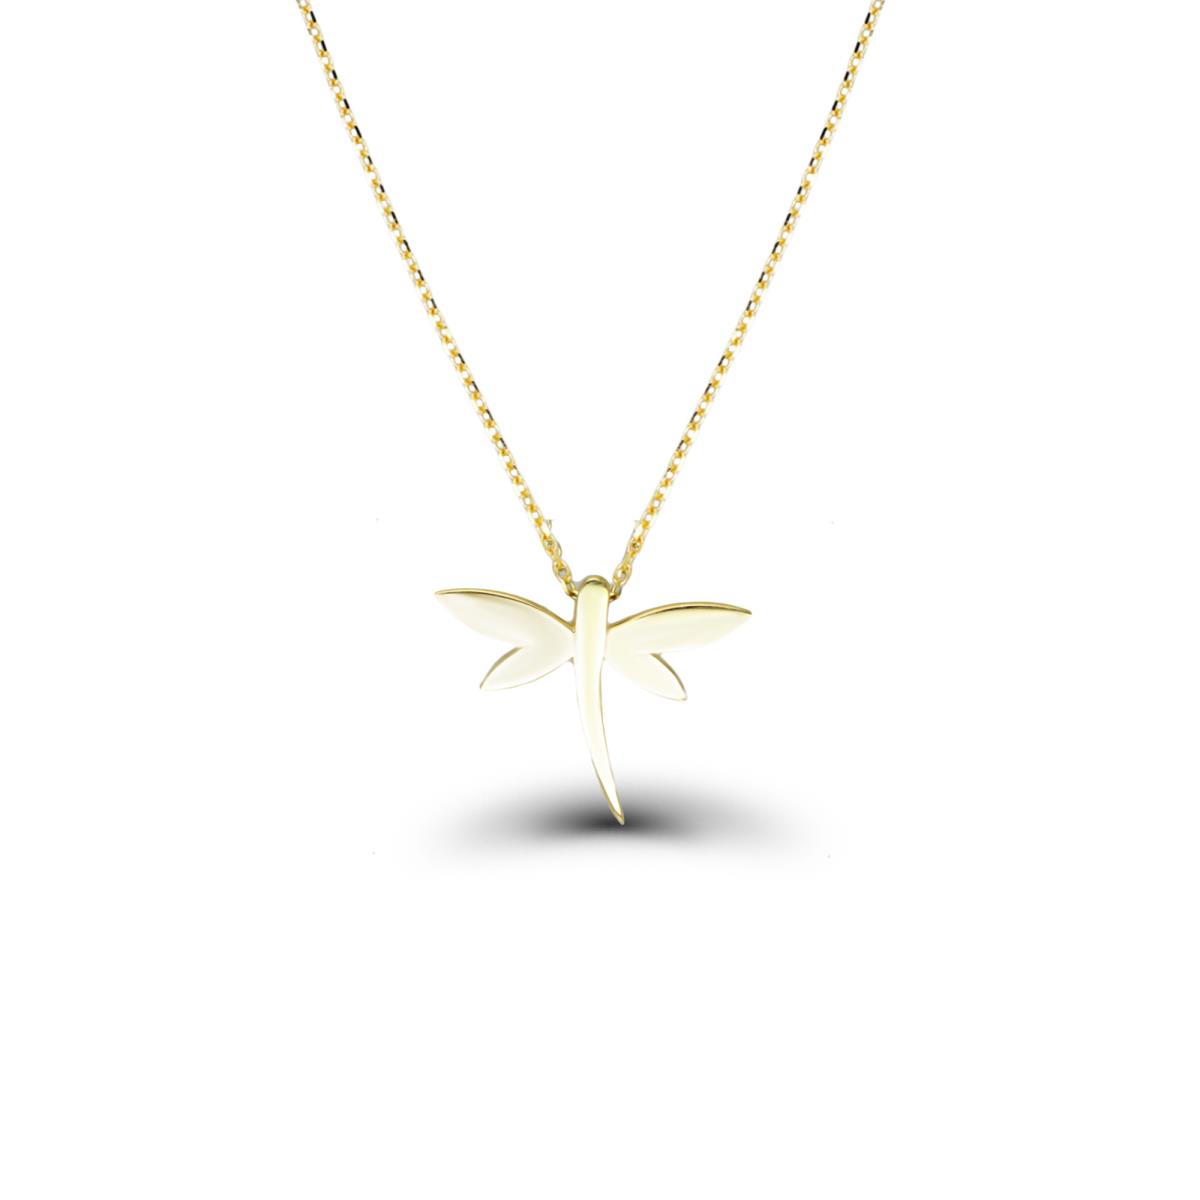 10K Yellow Gold Dragonfly 16"+2" Necklace